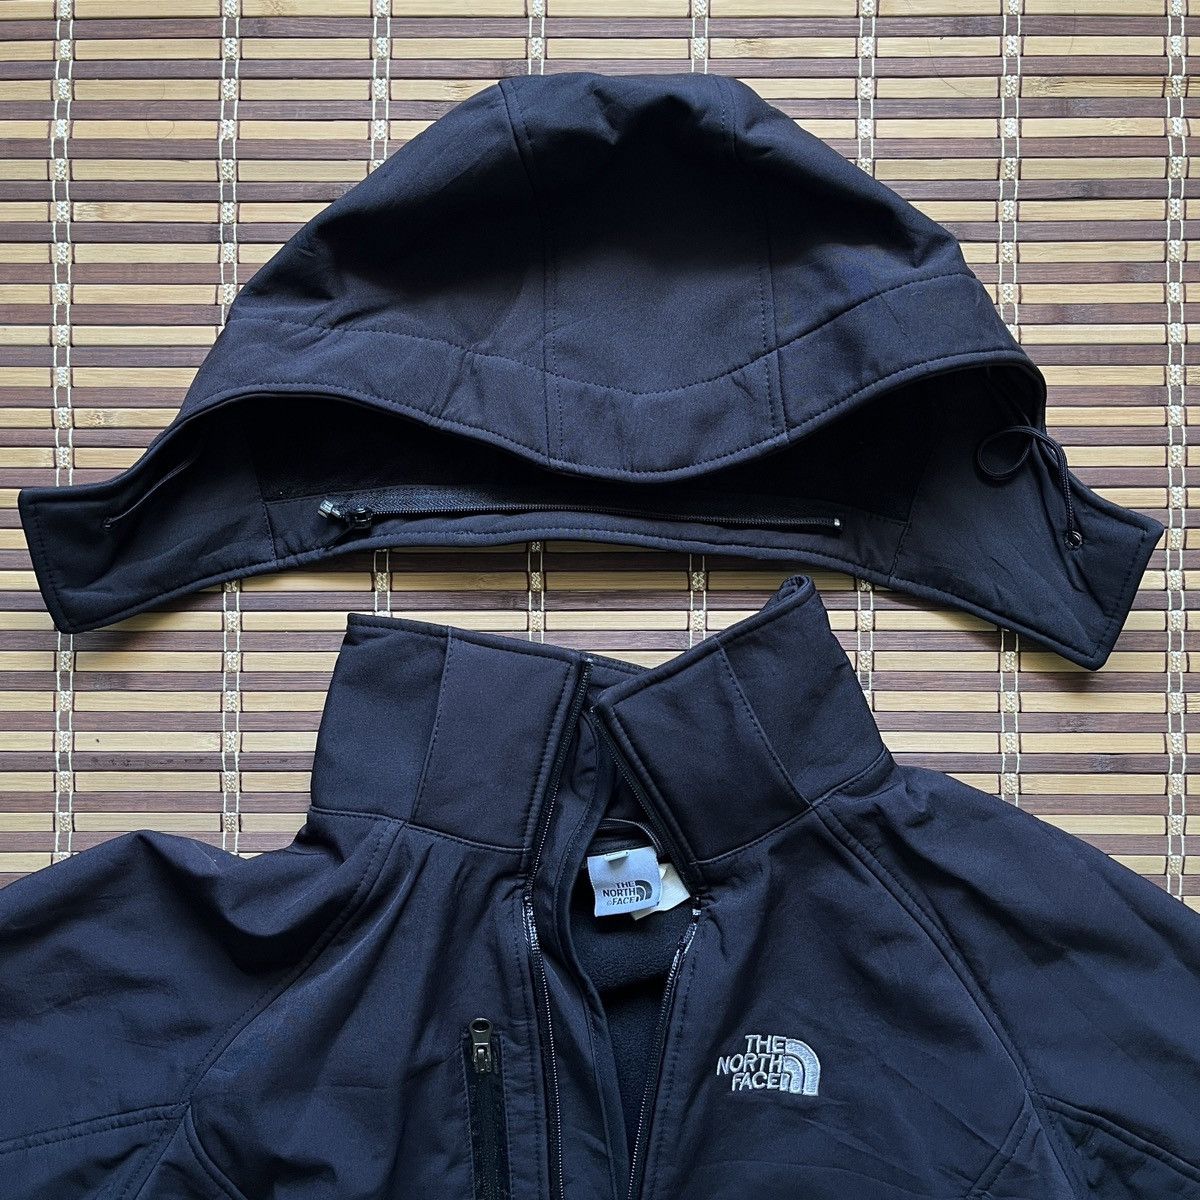 Outdoor Style Go Out! - The North Face X Goretex Summit Series Jacket - 17